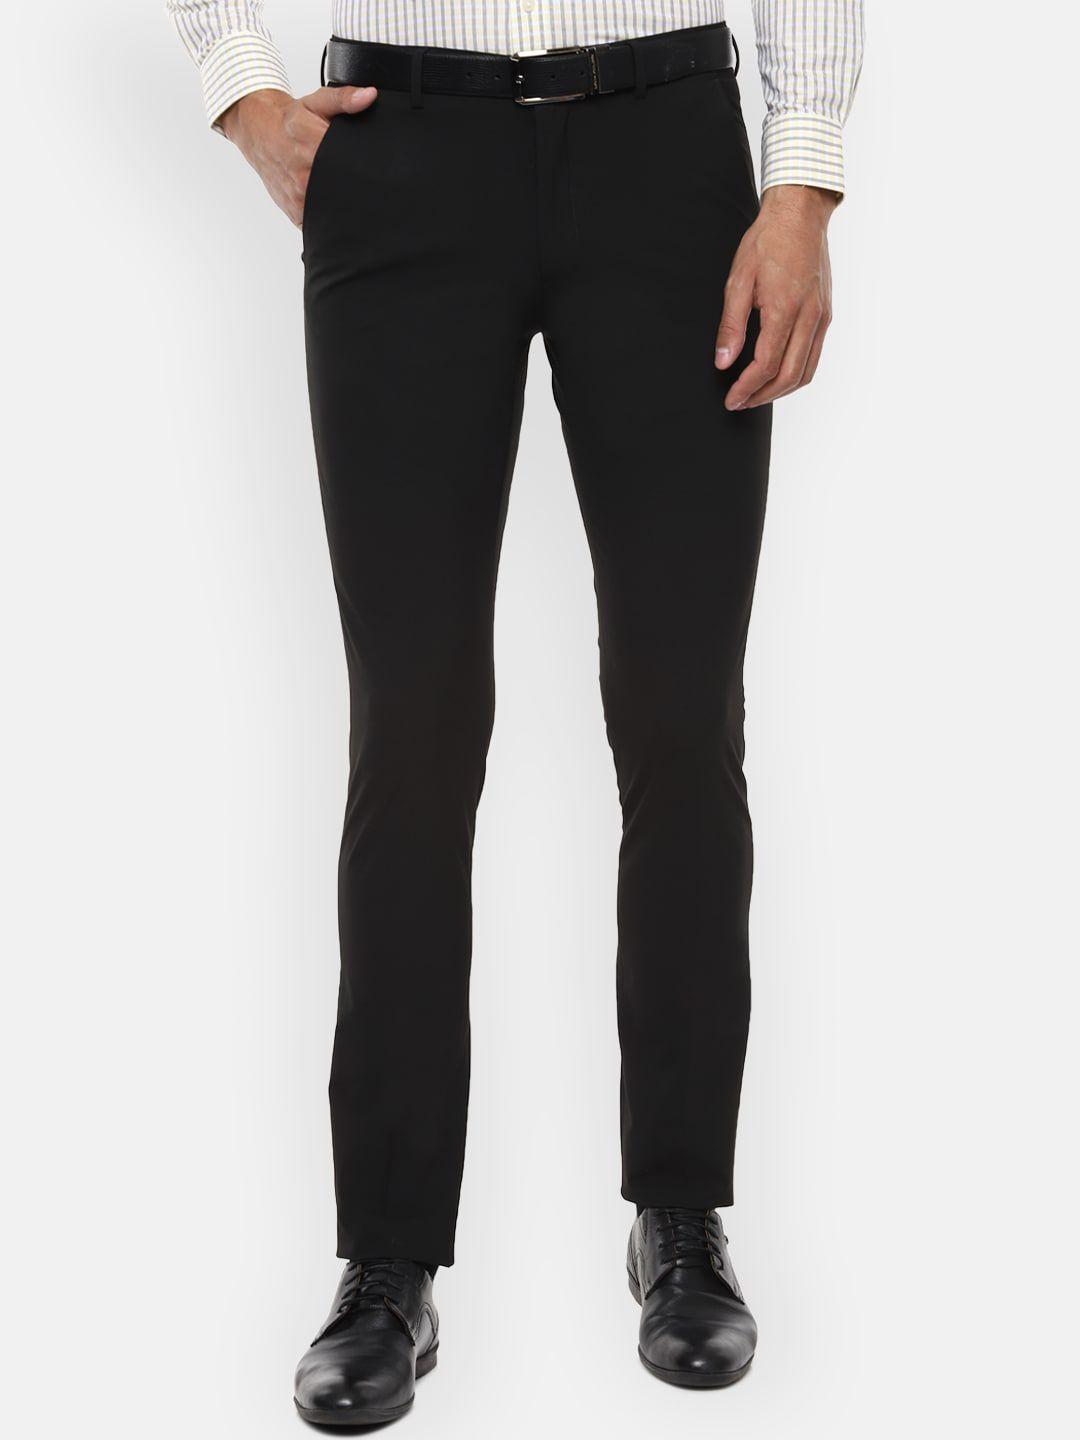 louis-philippe-men-mid-rise-skinny-fit-formal-trousers